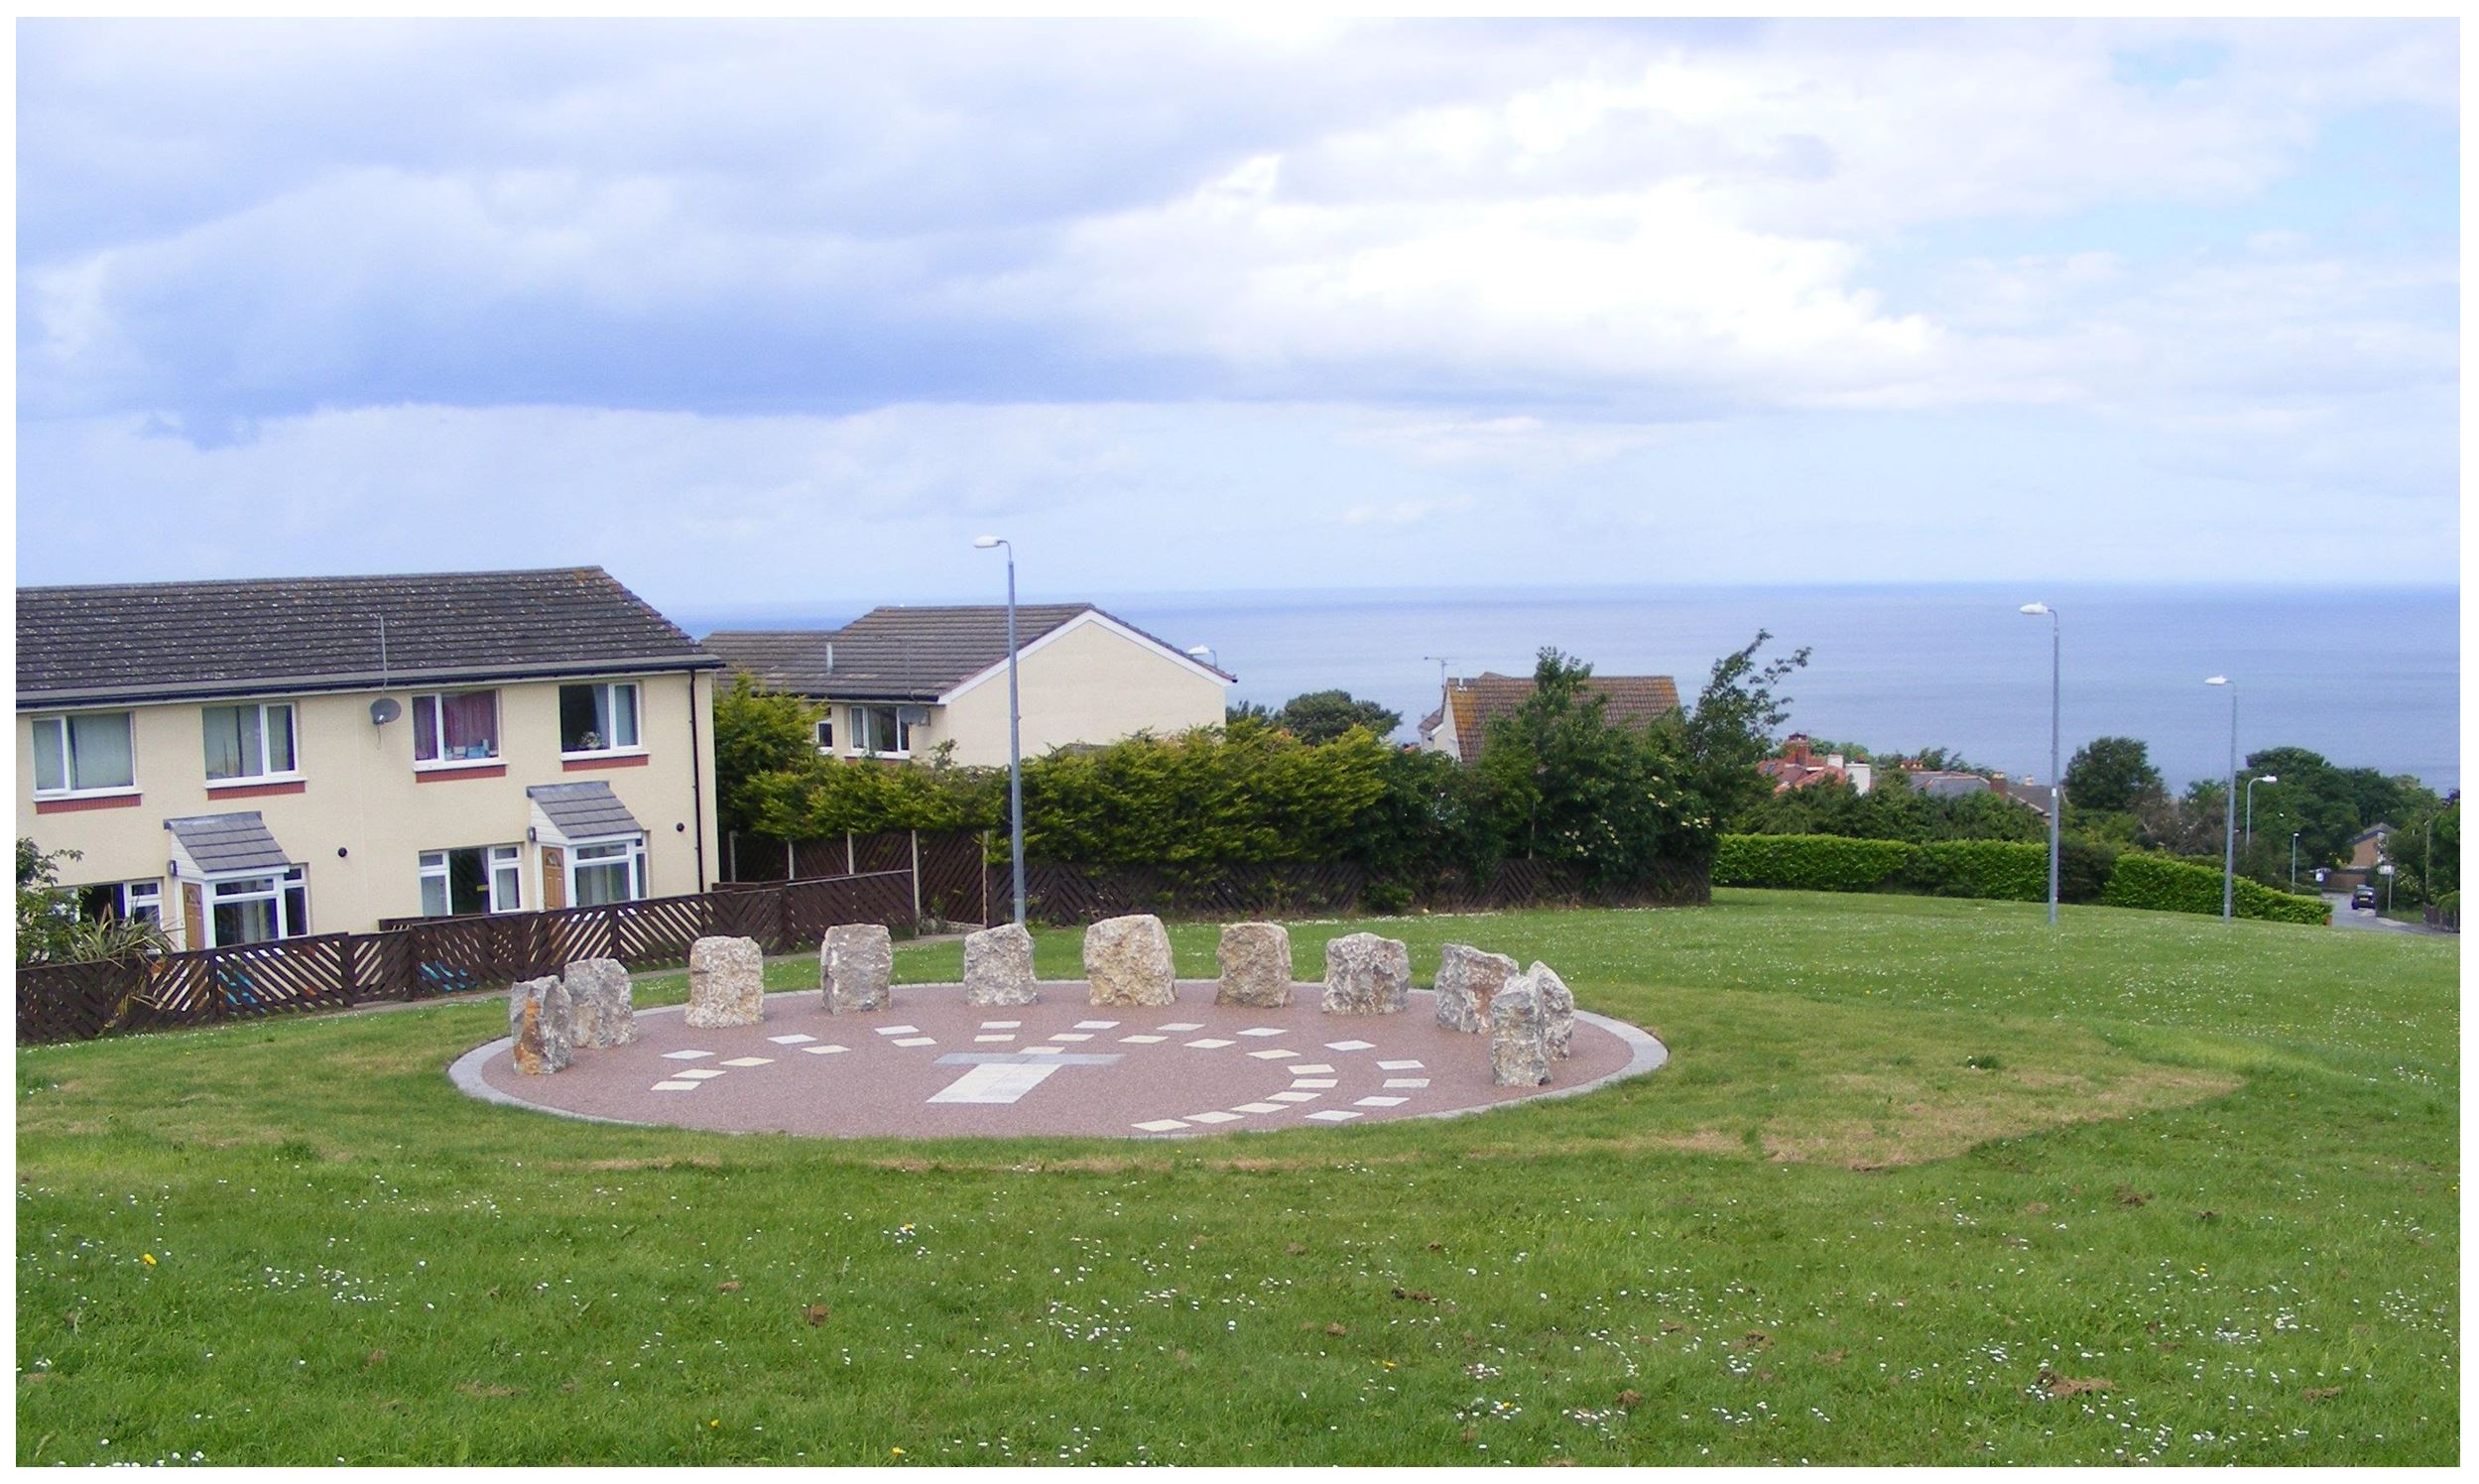 Human sundial at Peulwys estate with beautiful views over the sea